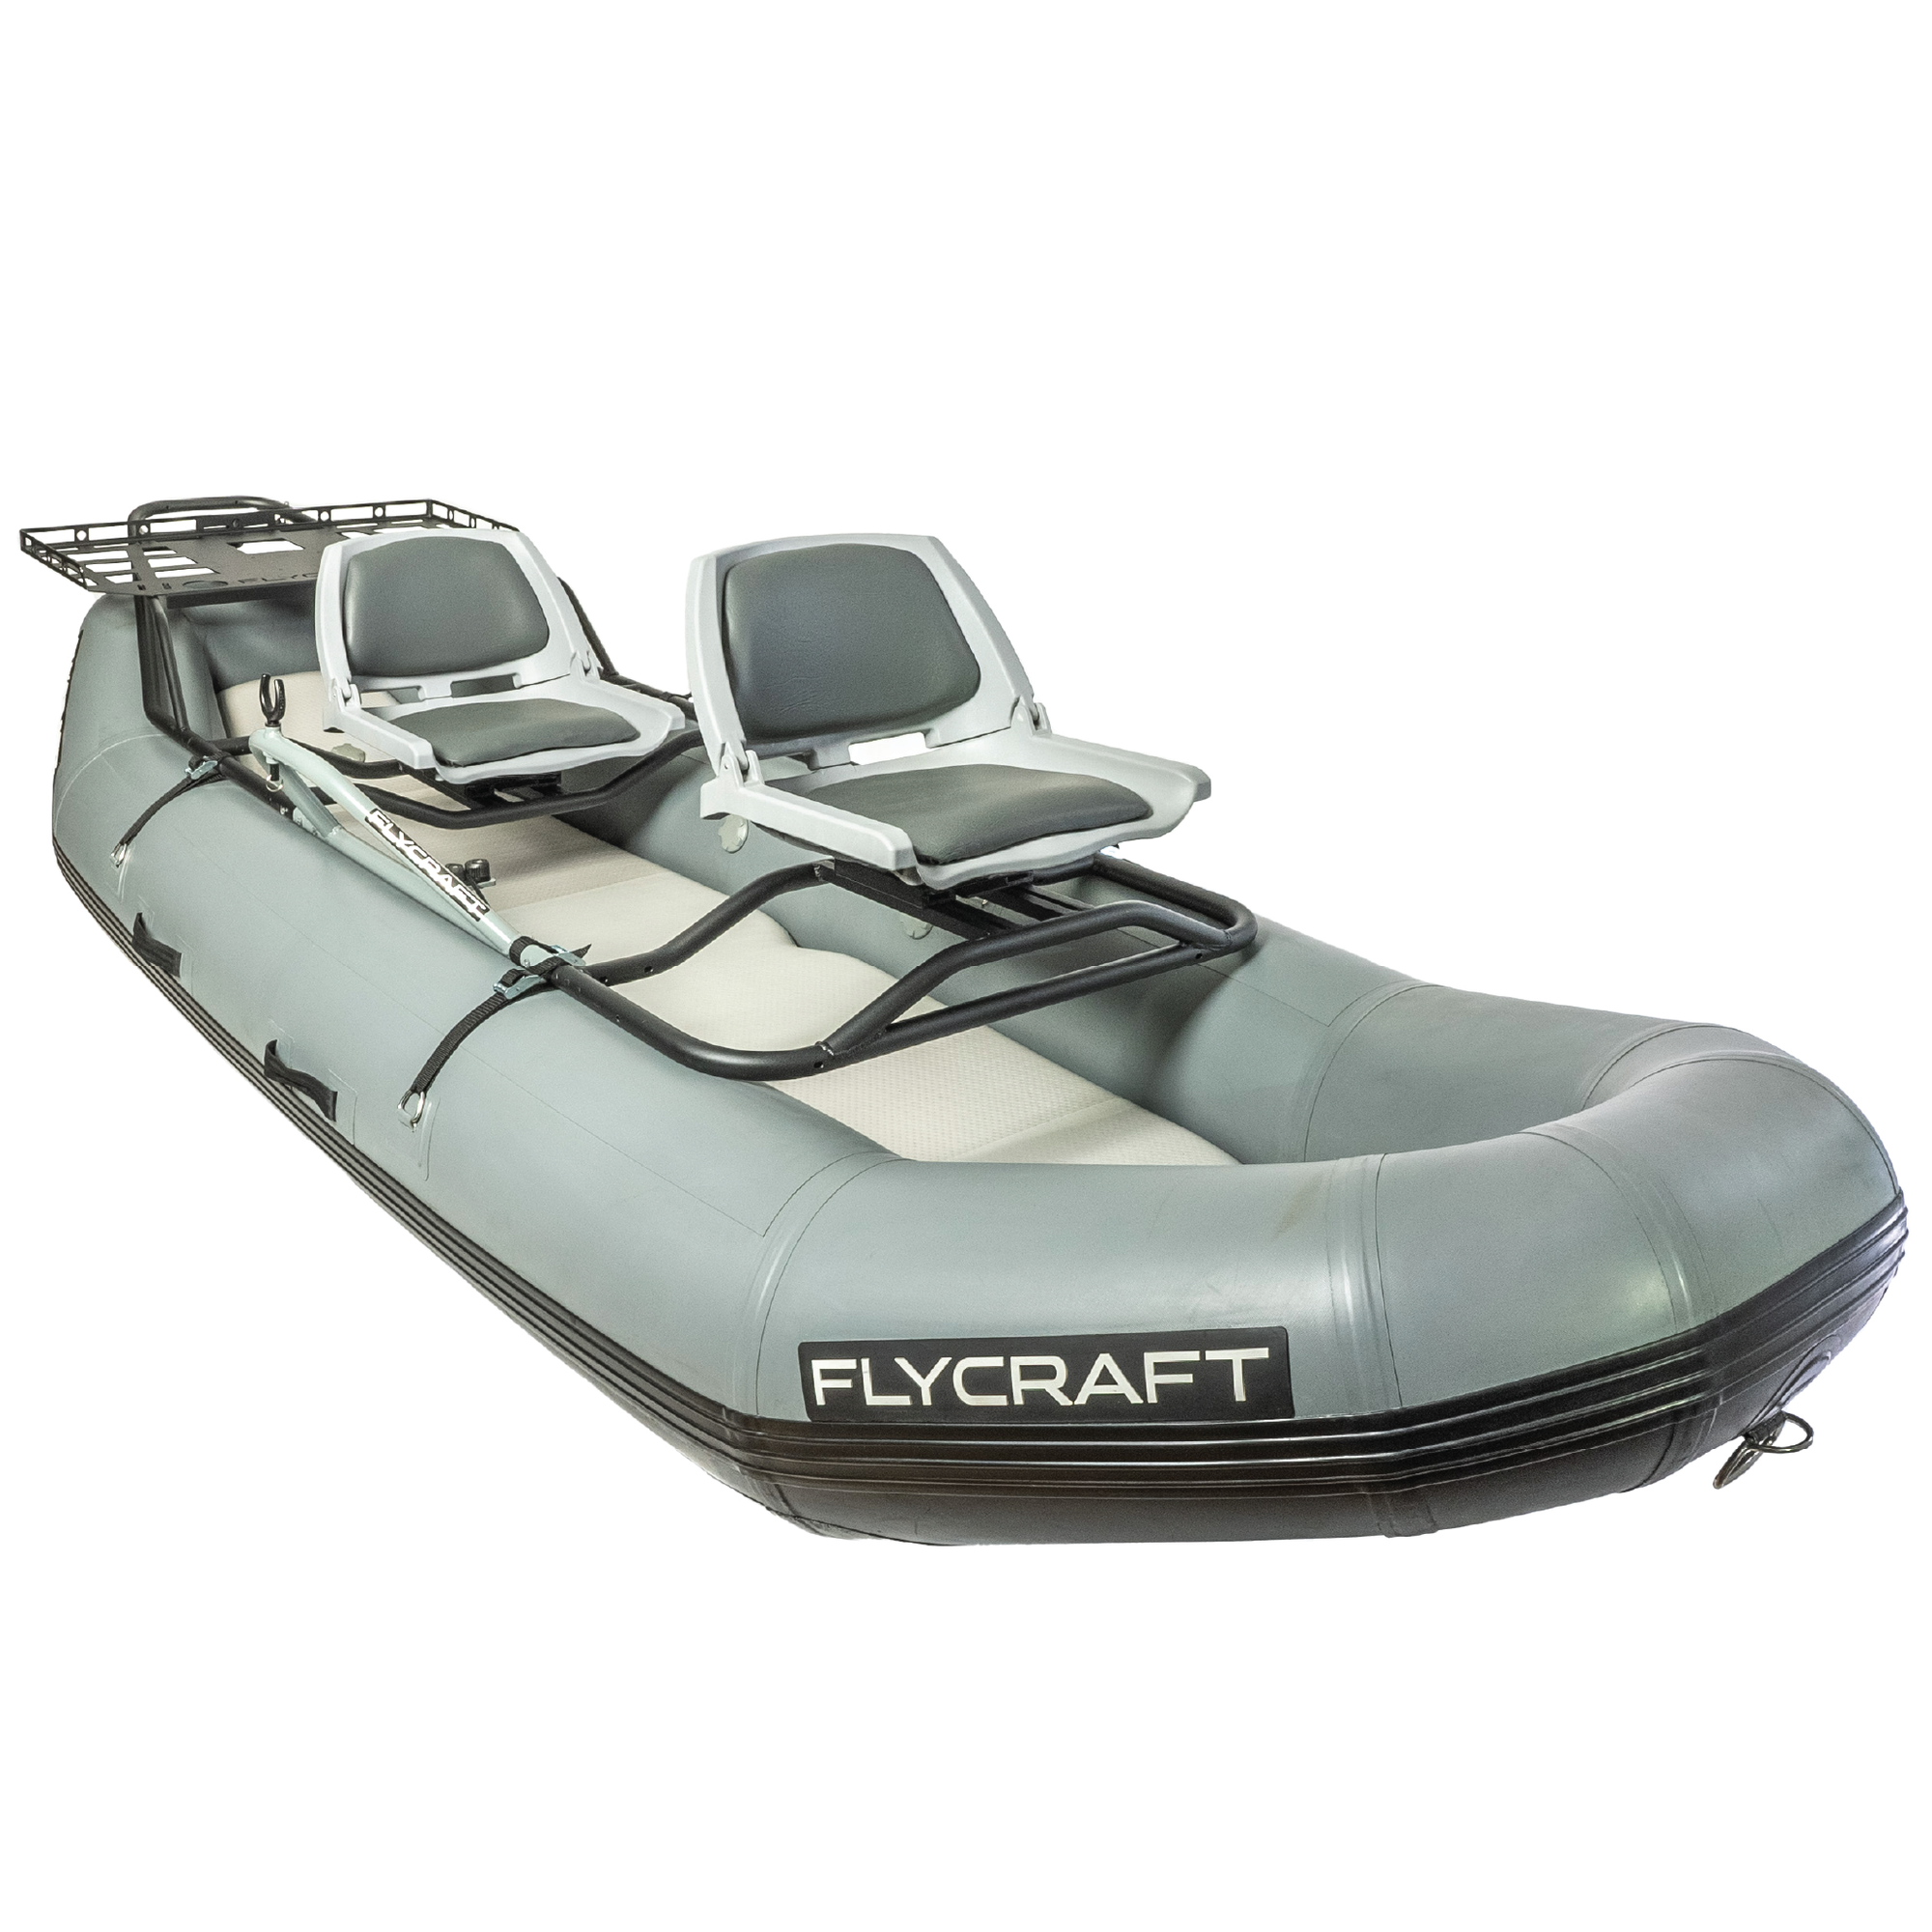 Boats Used Inflatable Price, 2024 Boats Used Inflatable Price